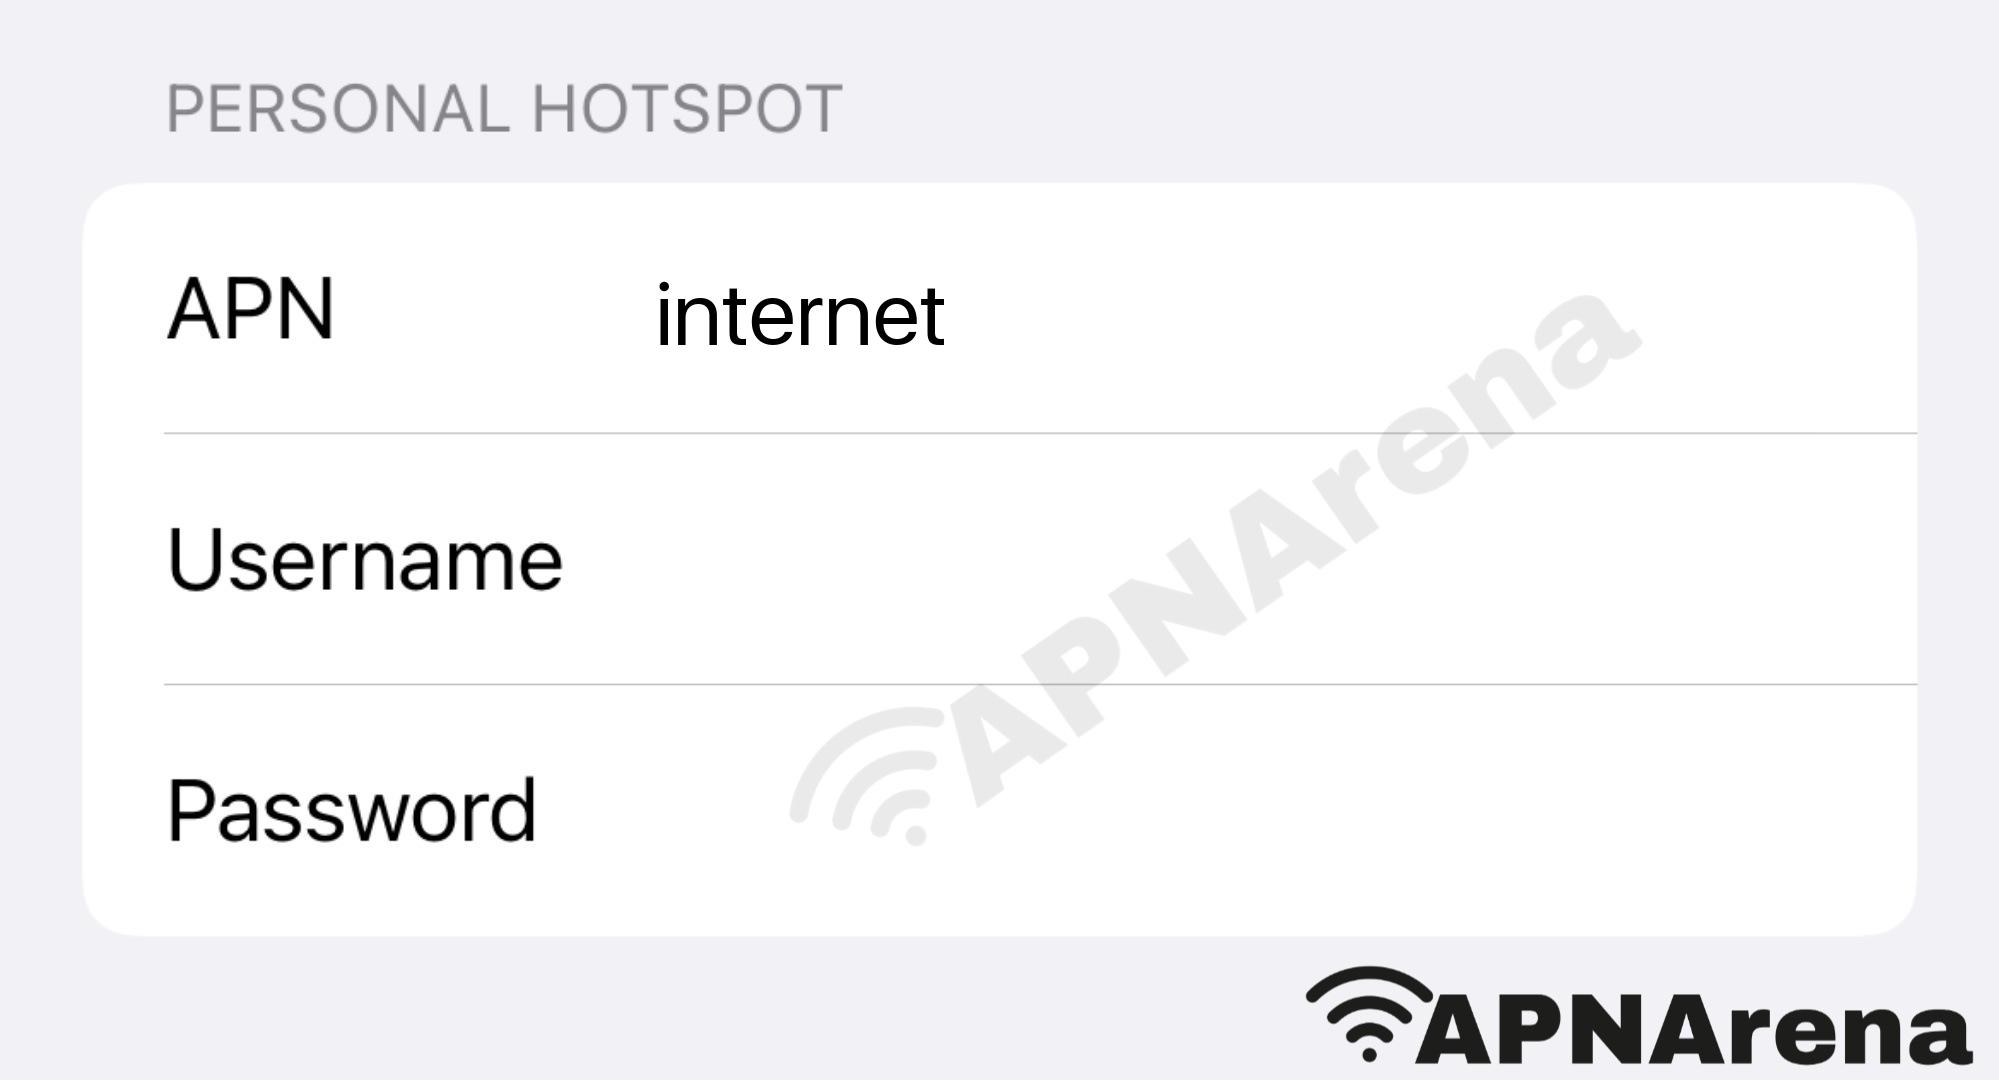 BZRMobile Personal Hotspot Settings for iPhone